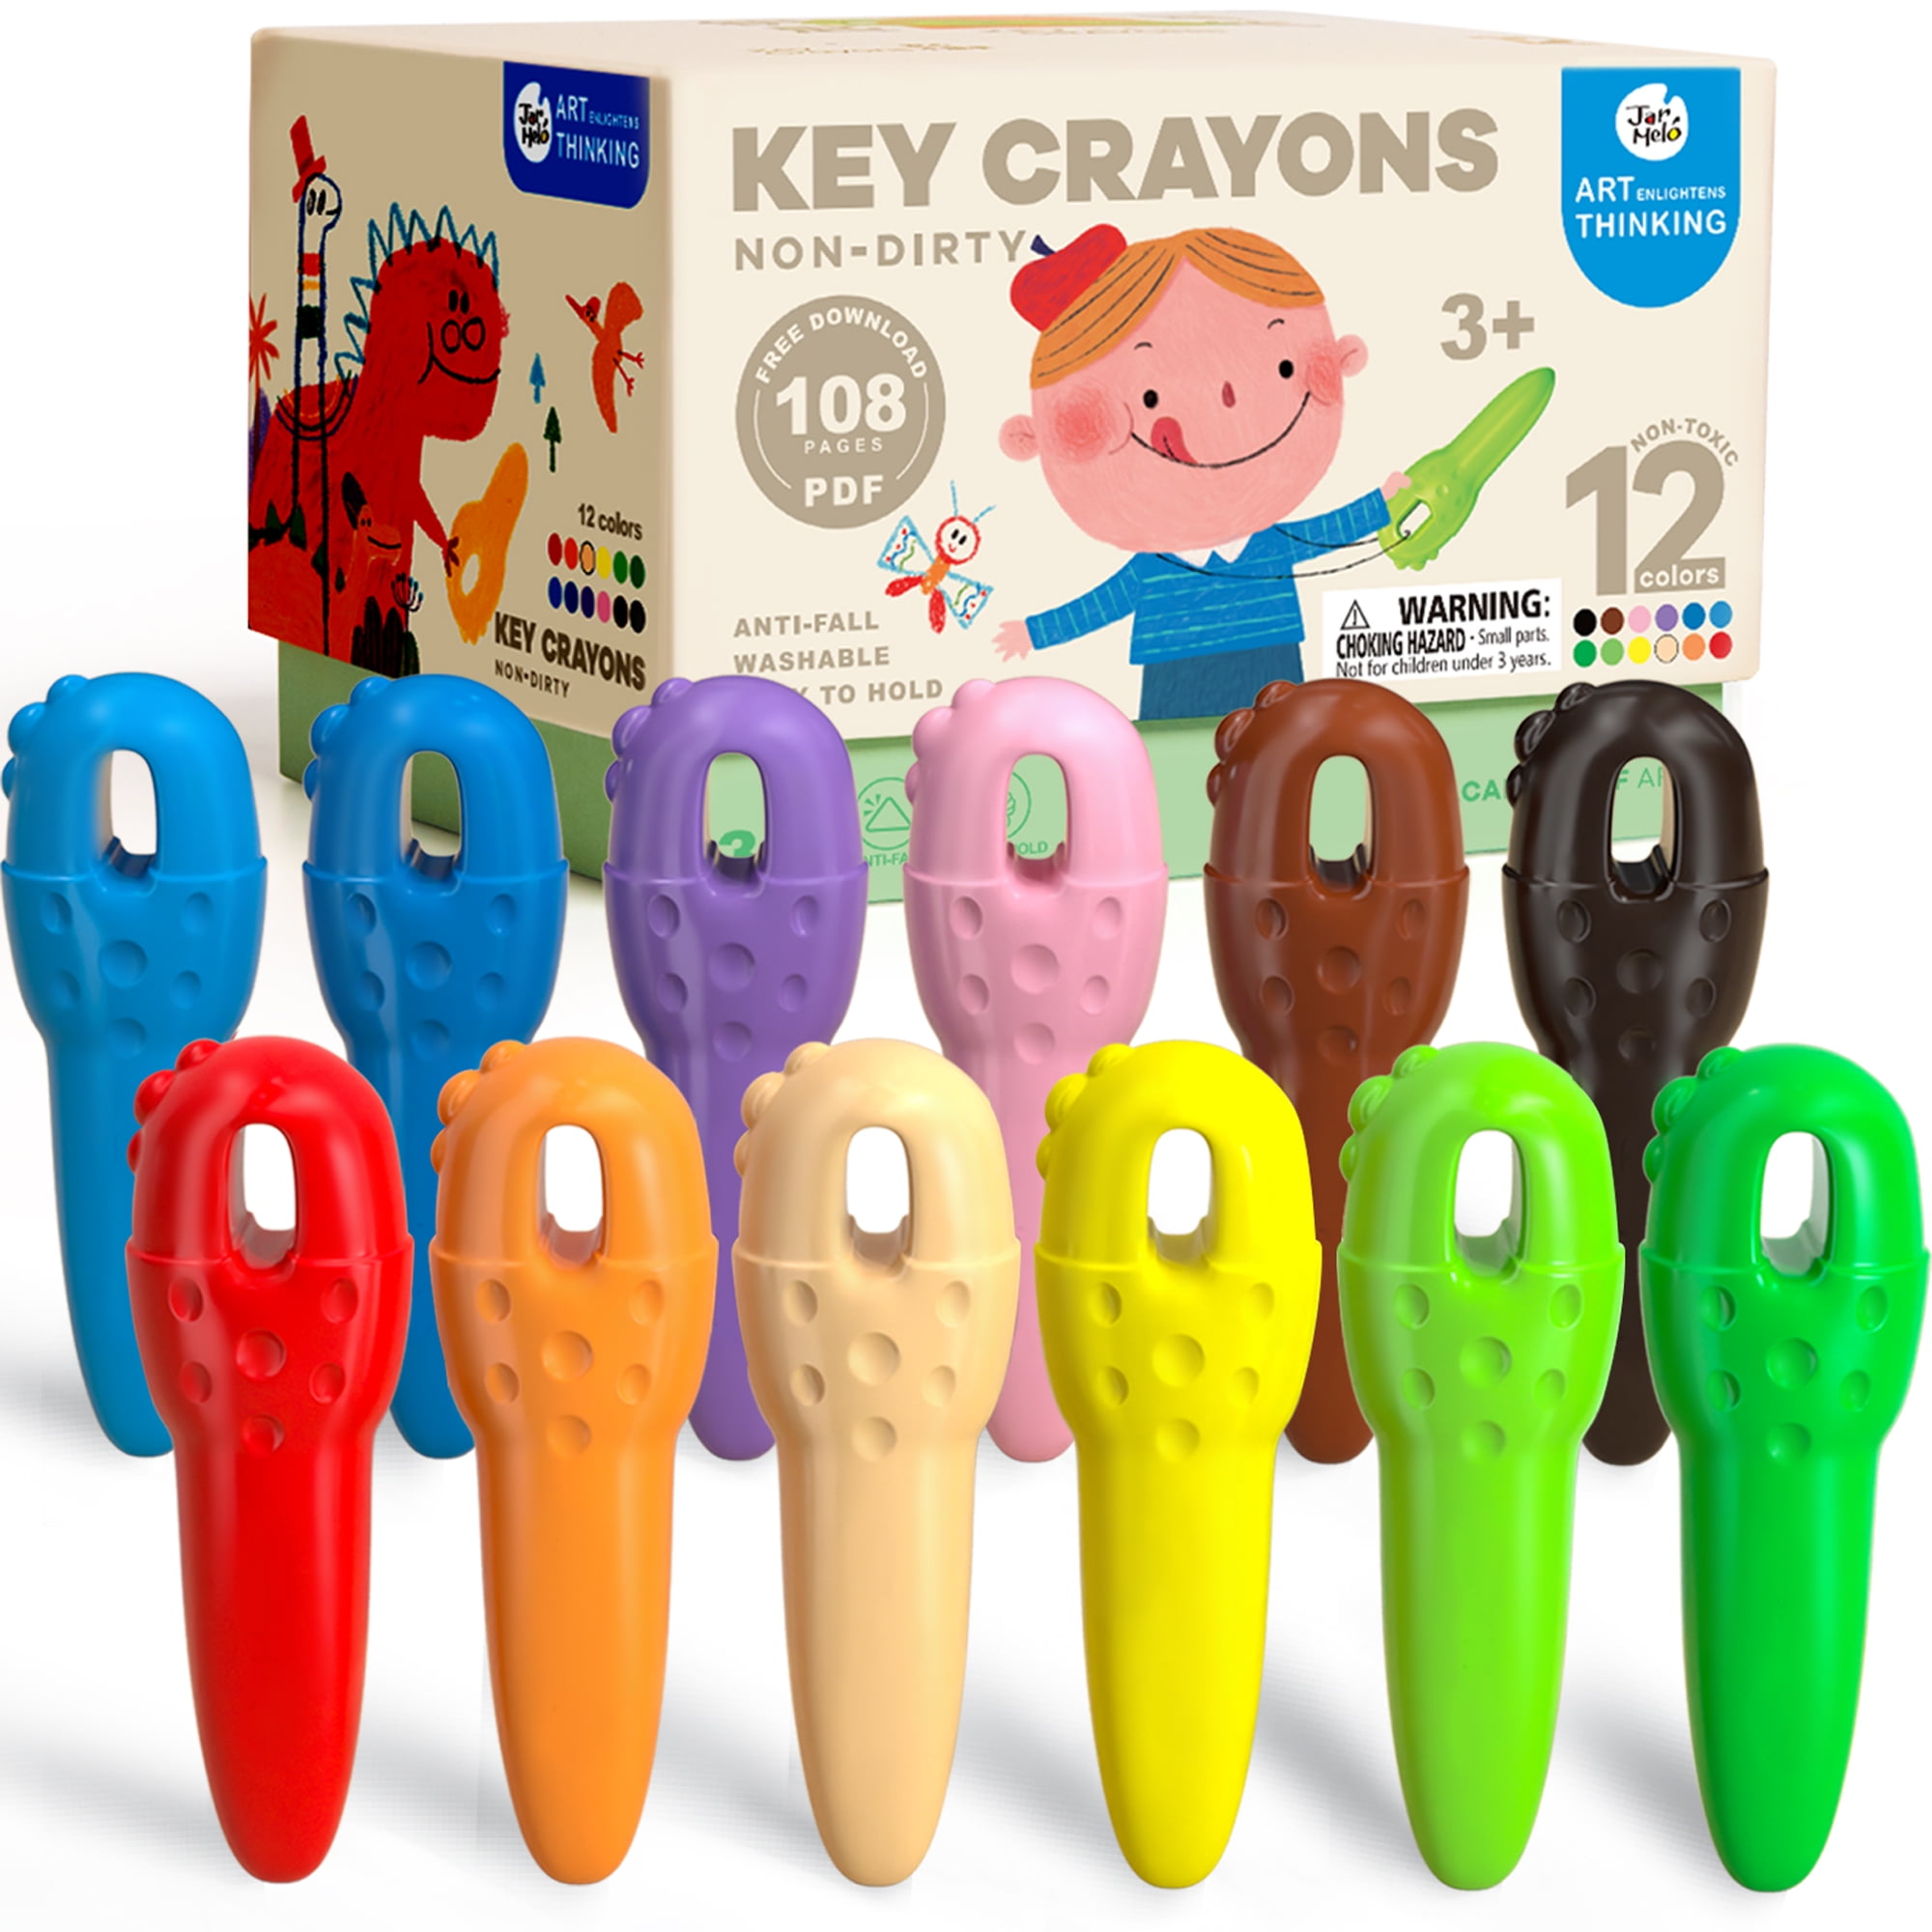 MASSRT Dinosaur Crayons for Toddlers, 12 Colors 99% Unbreakable Non-Toxic Crayon Gifts, Easy to Hold Washable Crayons for Kids, Safe Coloring Gifts